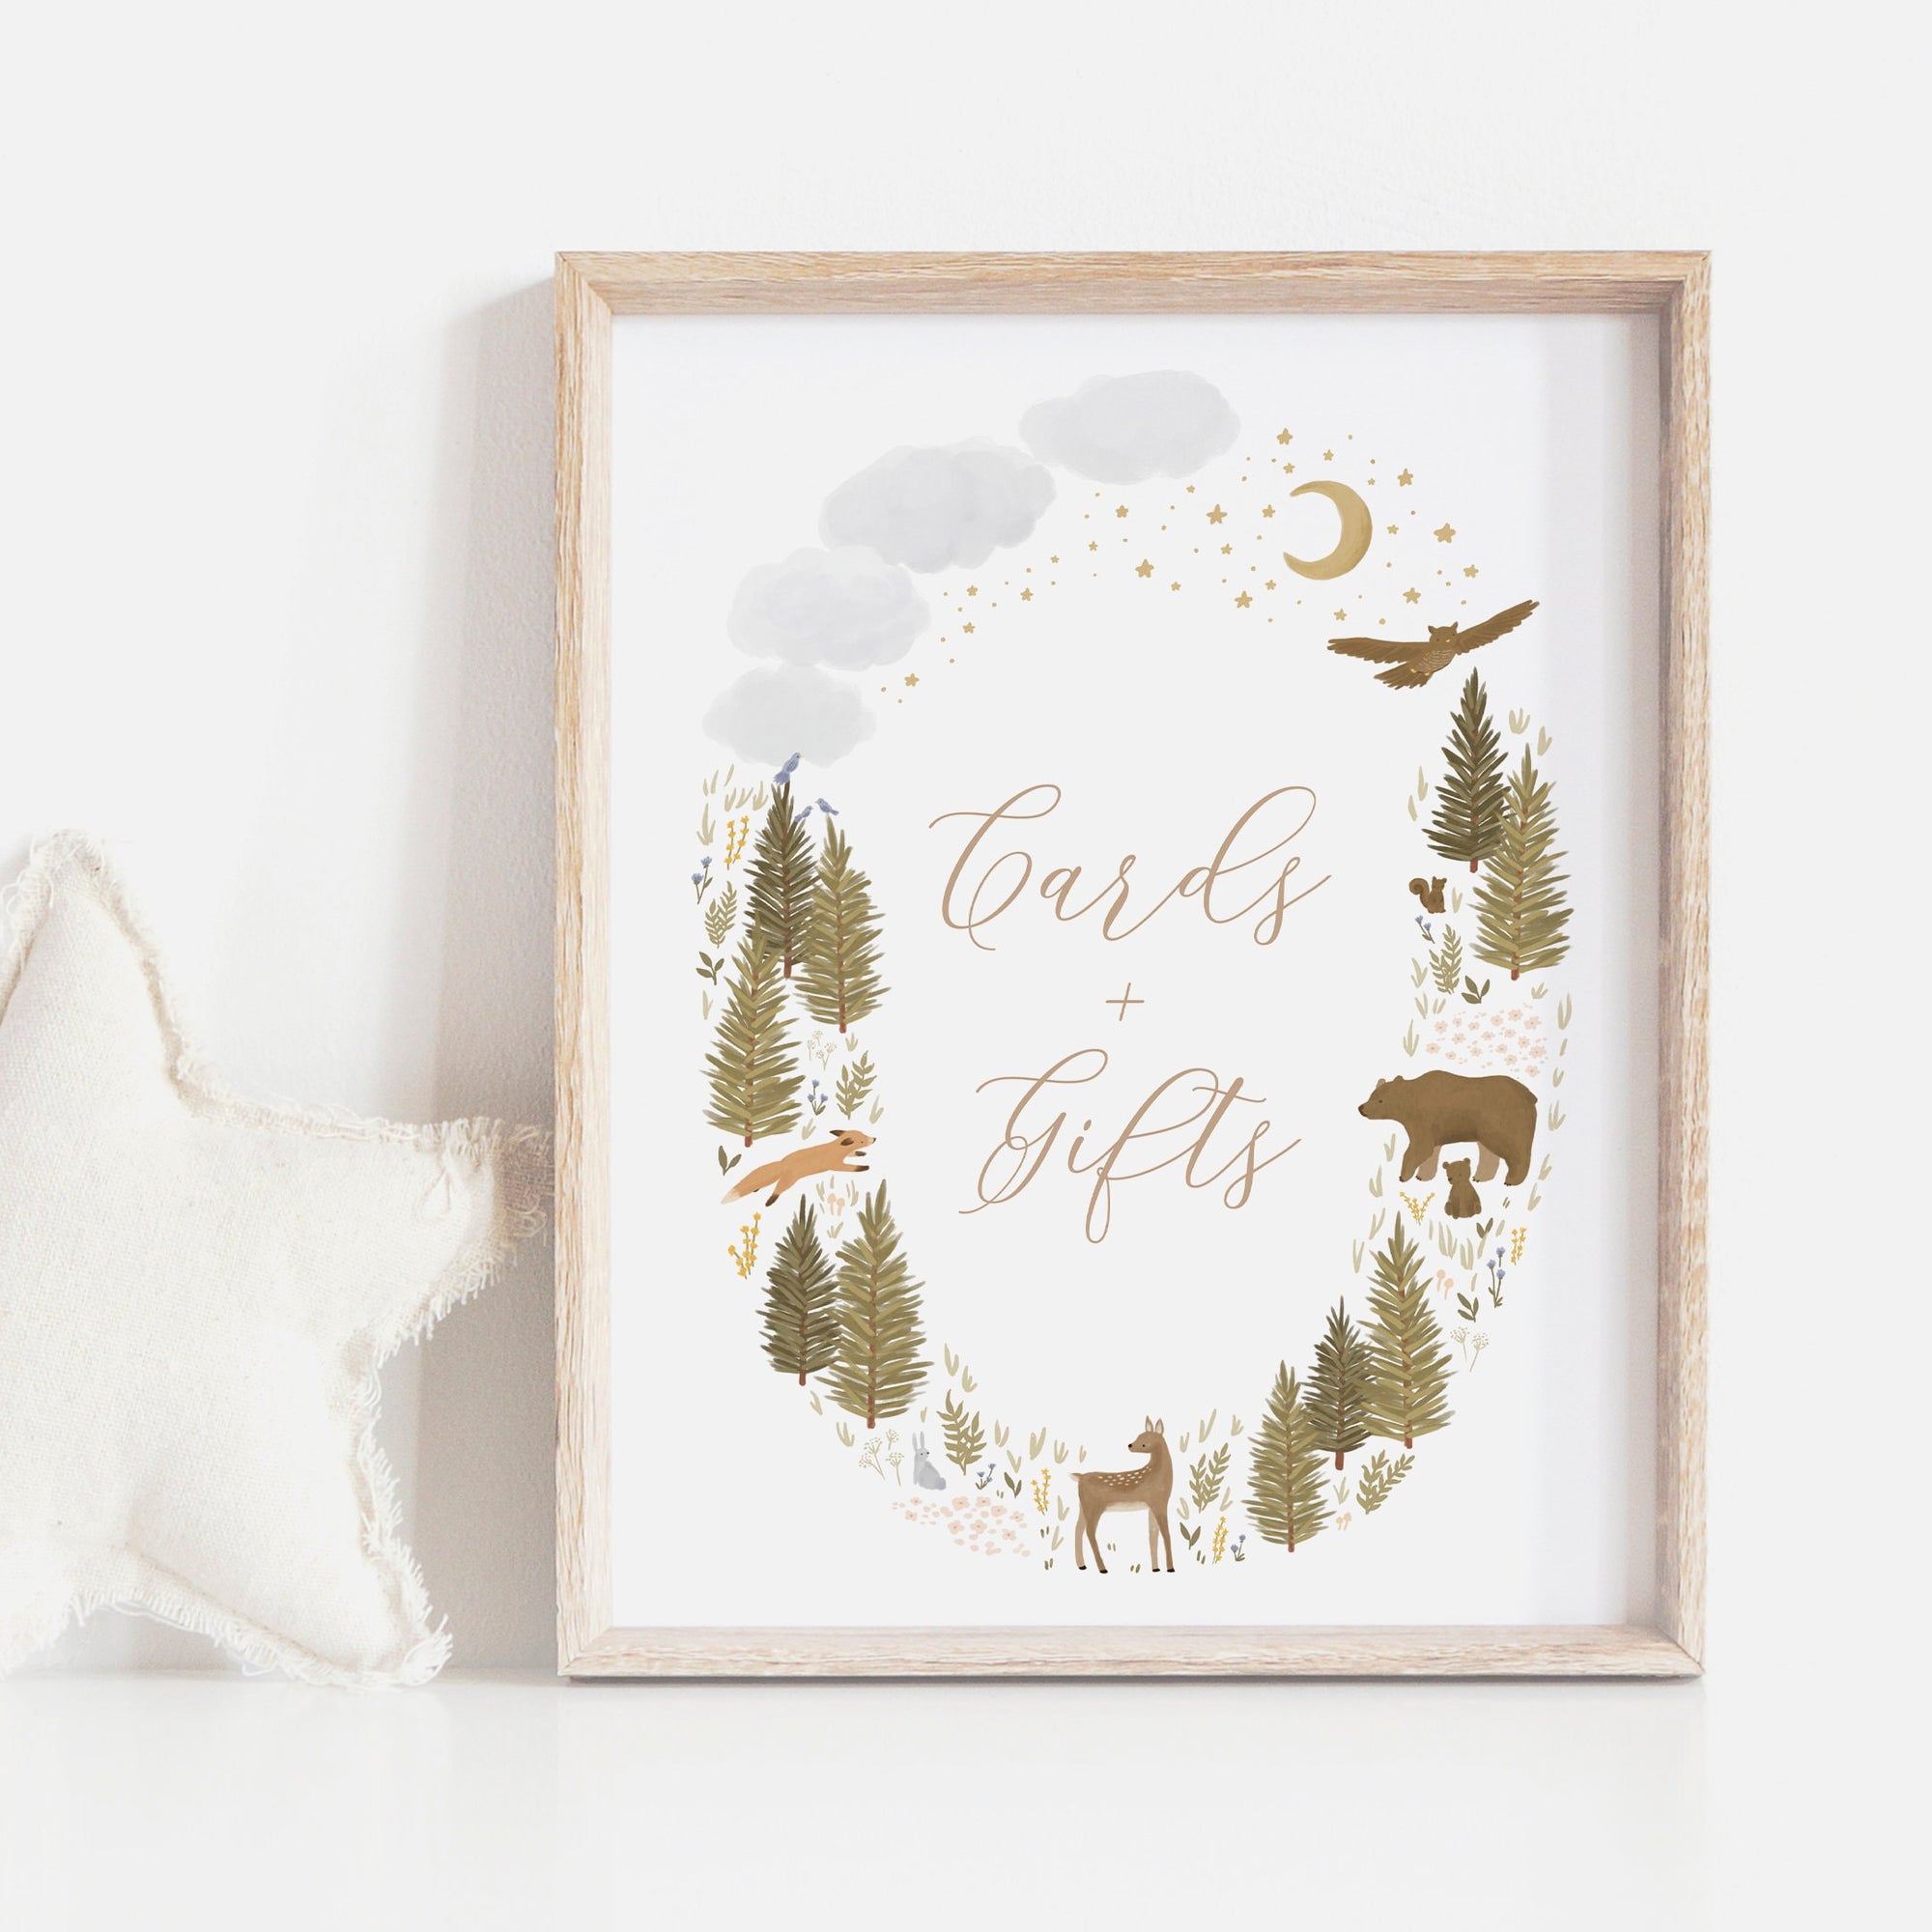 Woodland Baby Shower Cards and Gifts Sign, Printable Woodland Gift Table Sign, DIGITAL DOWNLOAD